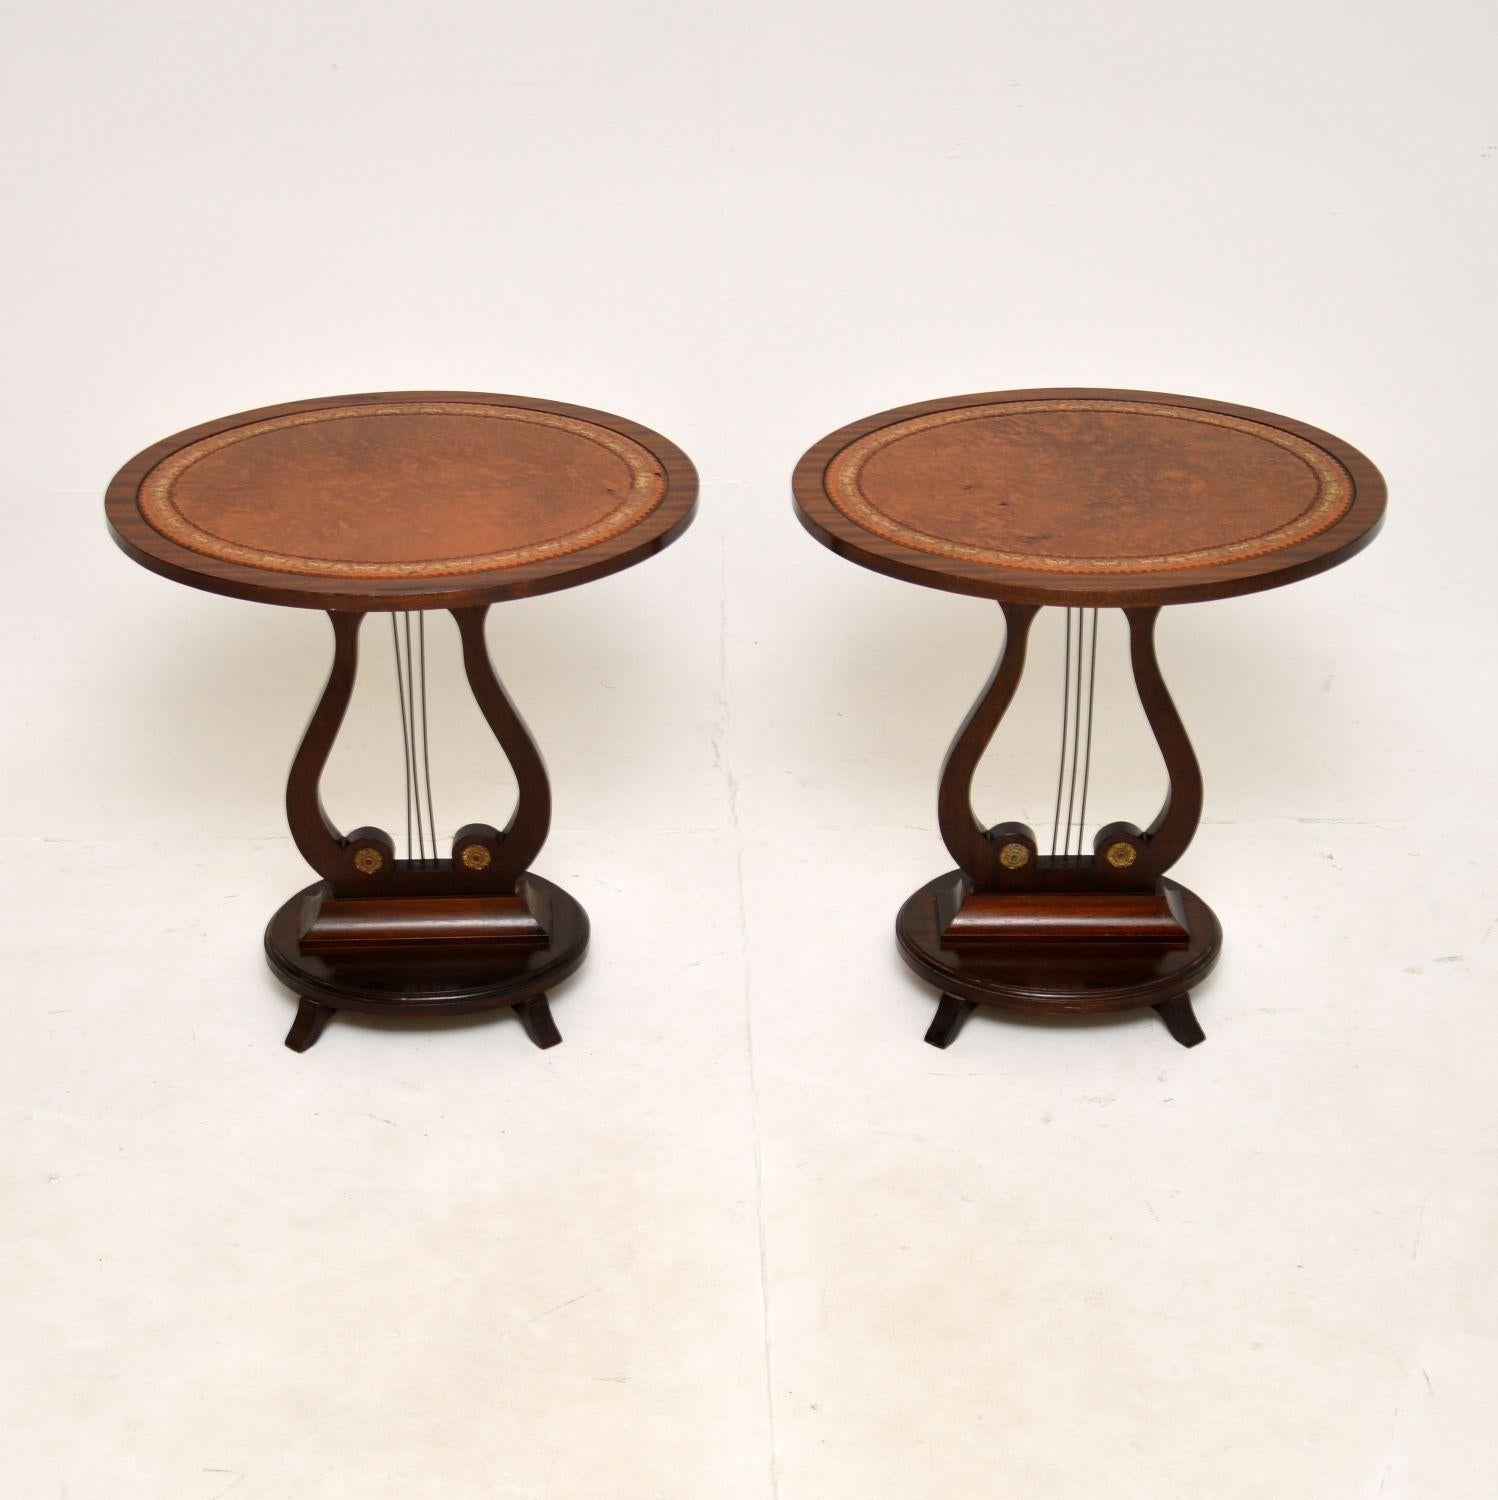 A lovely pair of antique Regency style side tables. They were made in England, they date from around the 1950’s.

The quality is excellent, they are beautifully designed with inset leather on the leather tops, and brass fixtures on the bottom. They